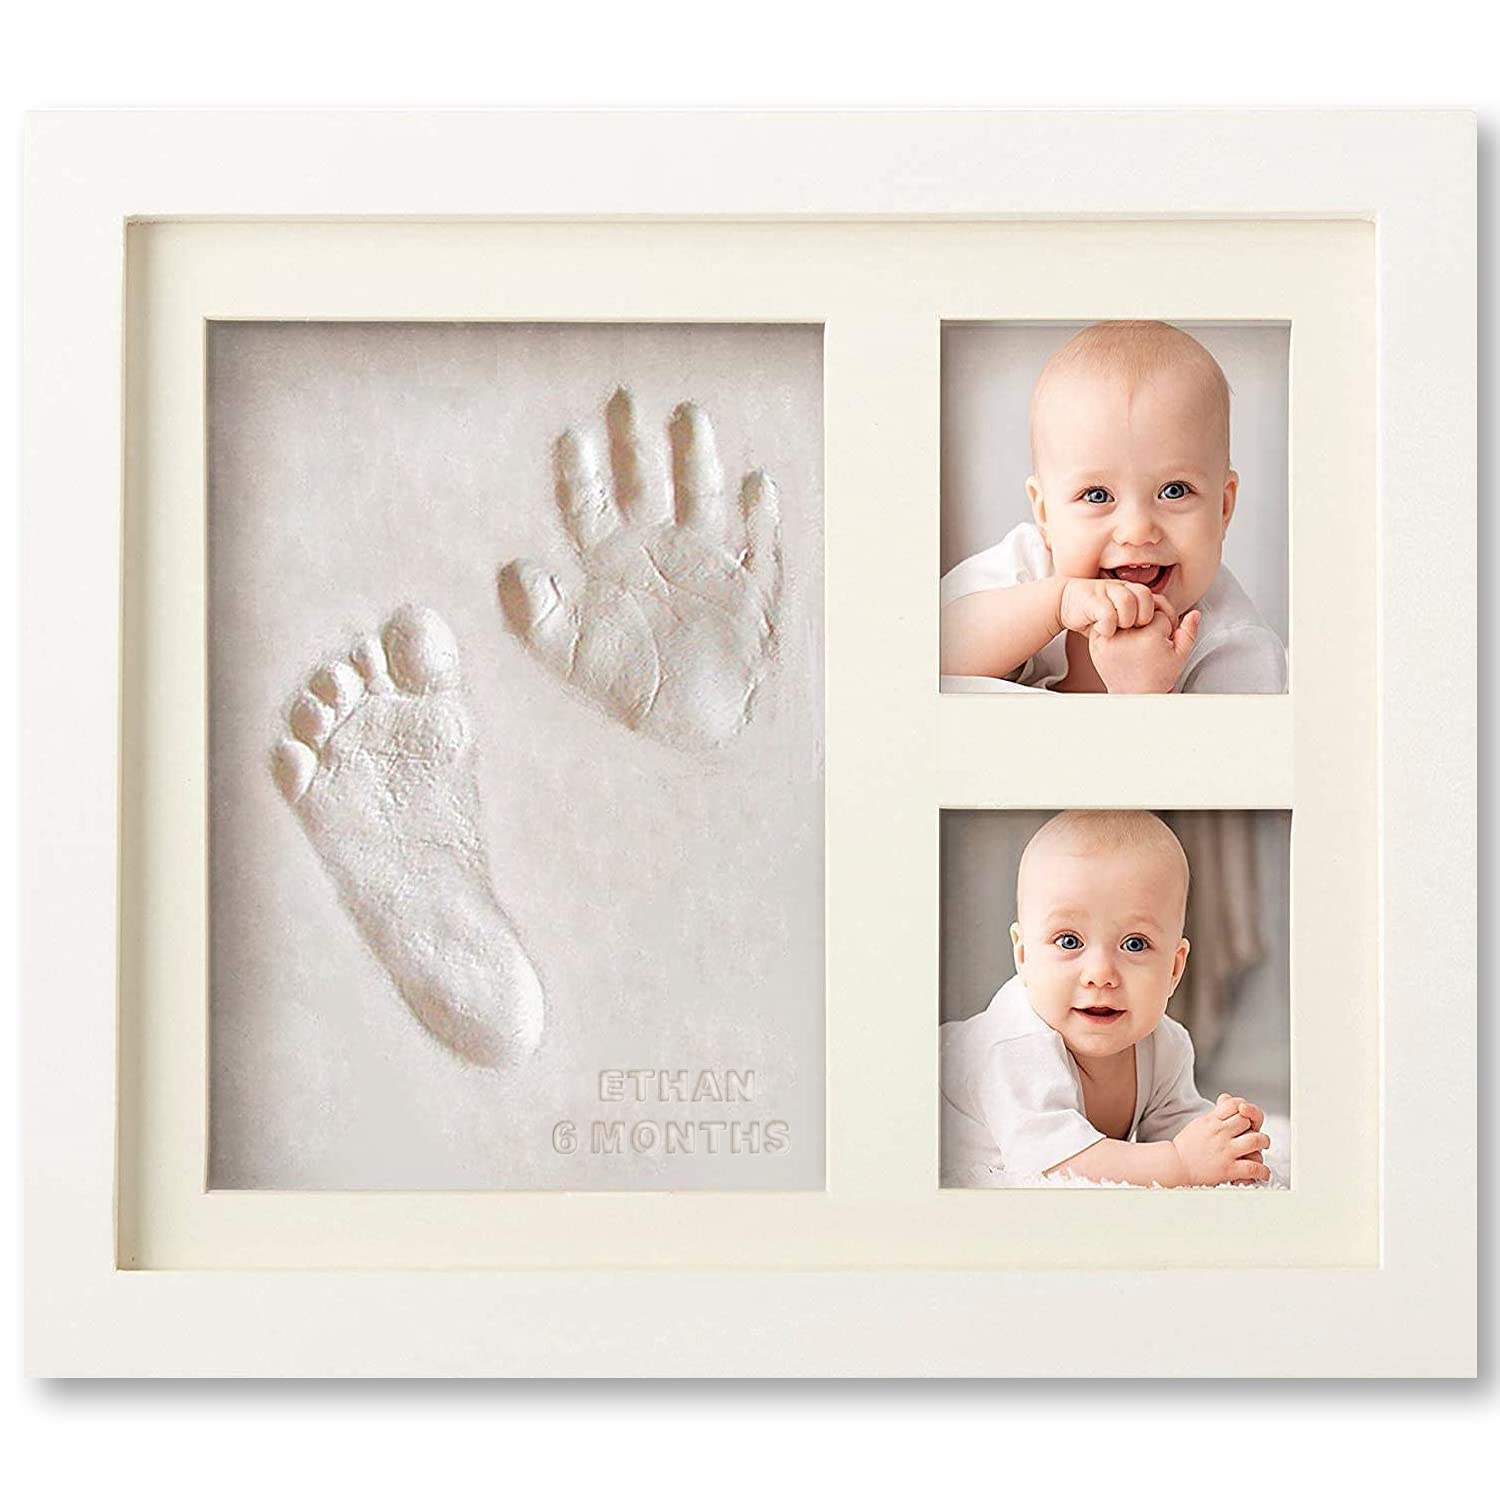 Baby Handprint Footprint Makers Kit Keepsake Photo Frame for Newborn Boys & Girls, Baby Gifts, Personalized Baby Milestone Gift, Memory Art Picture Frames for Baby Registry, Nursery Decor